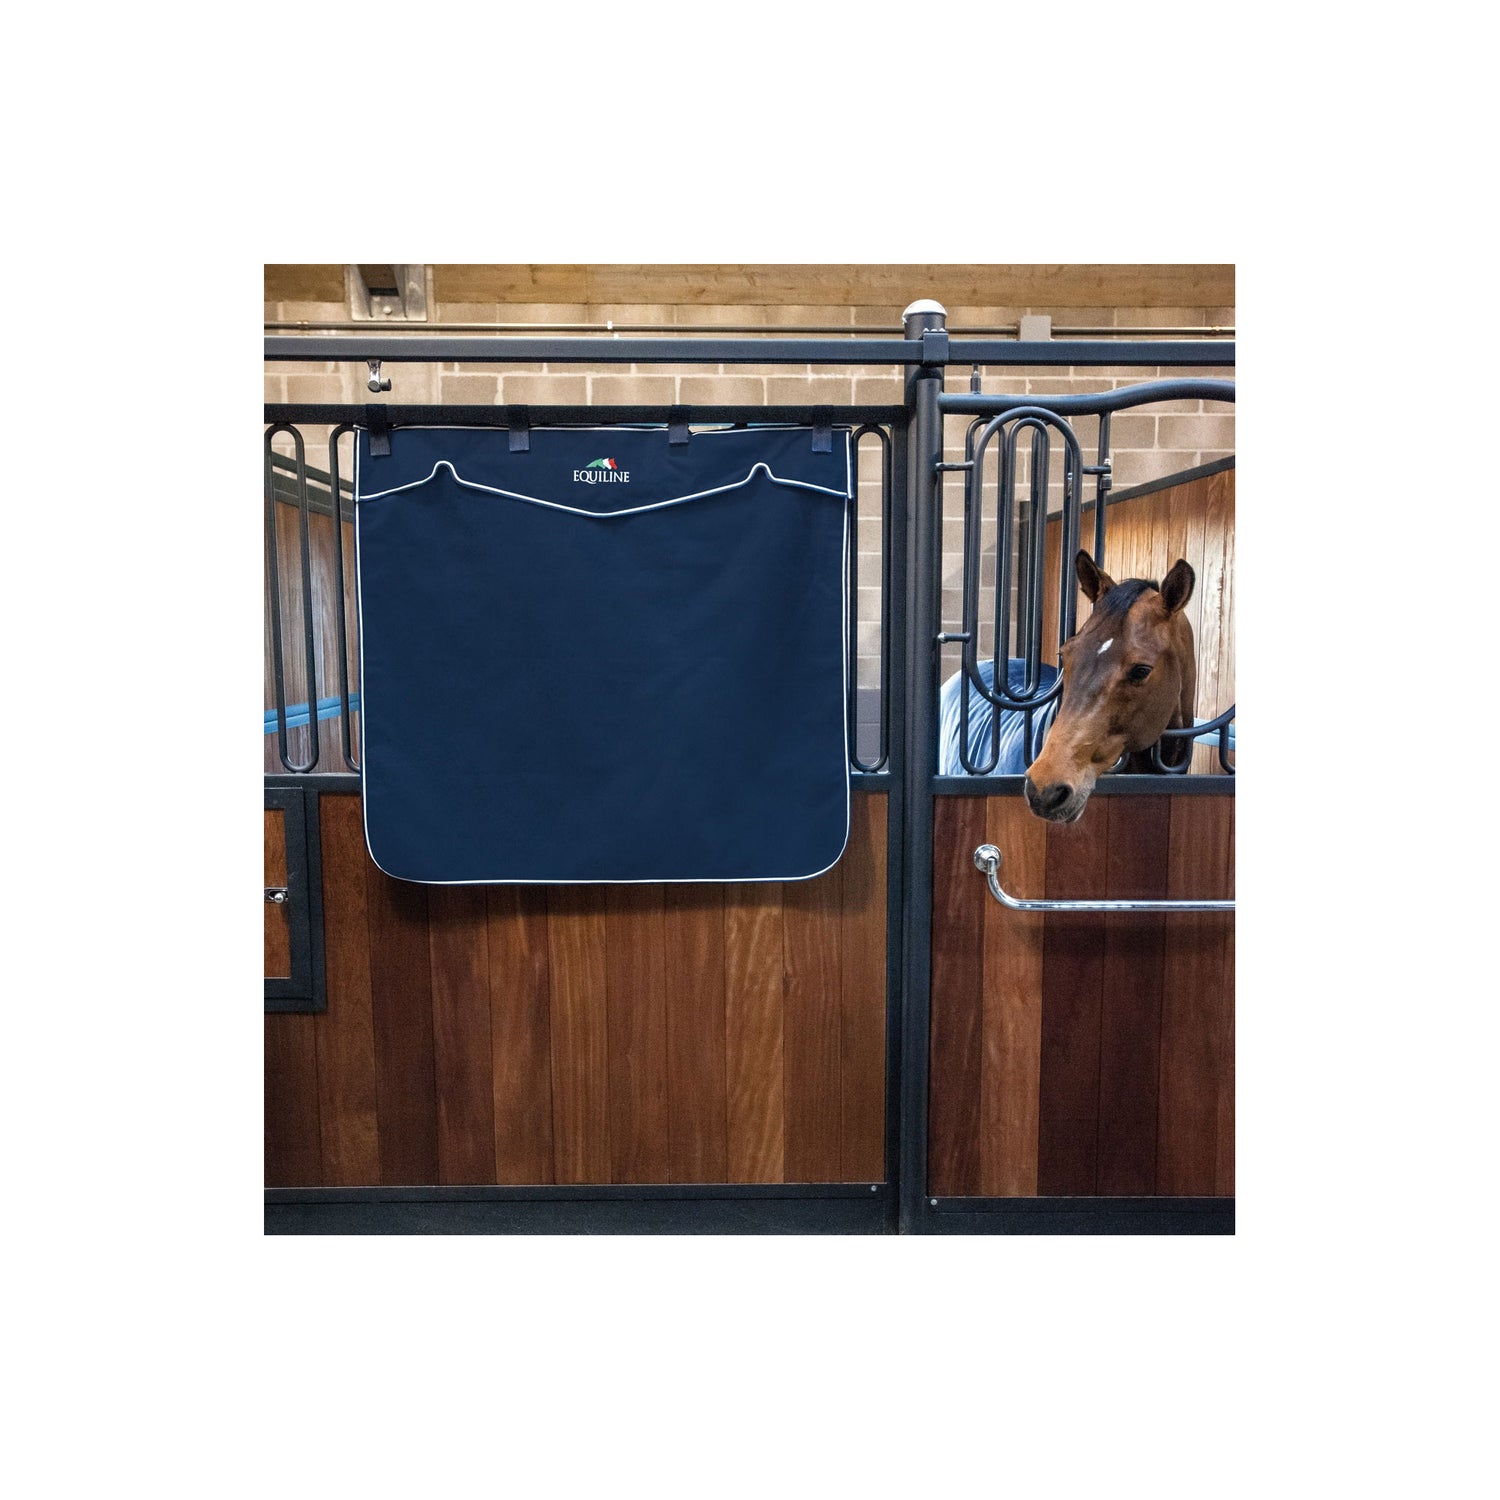 Equiline Stable Curtain